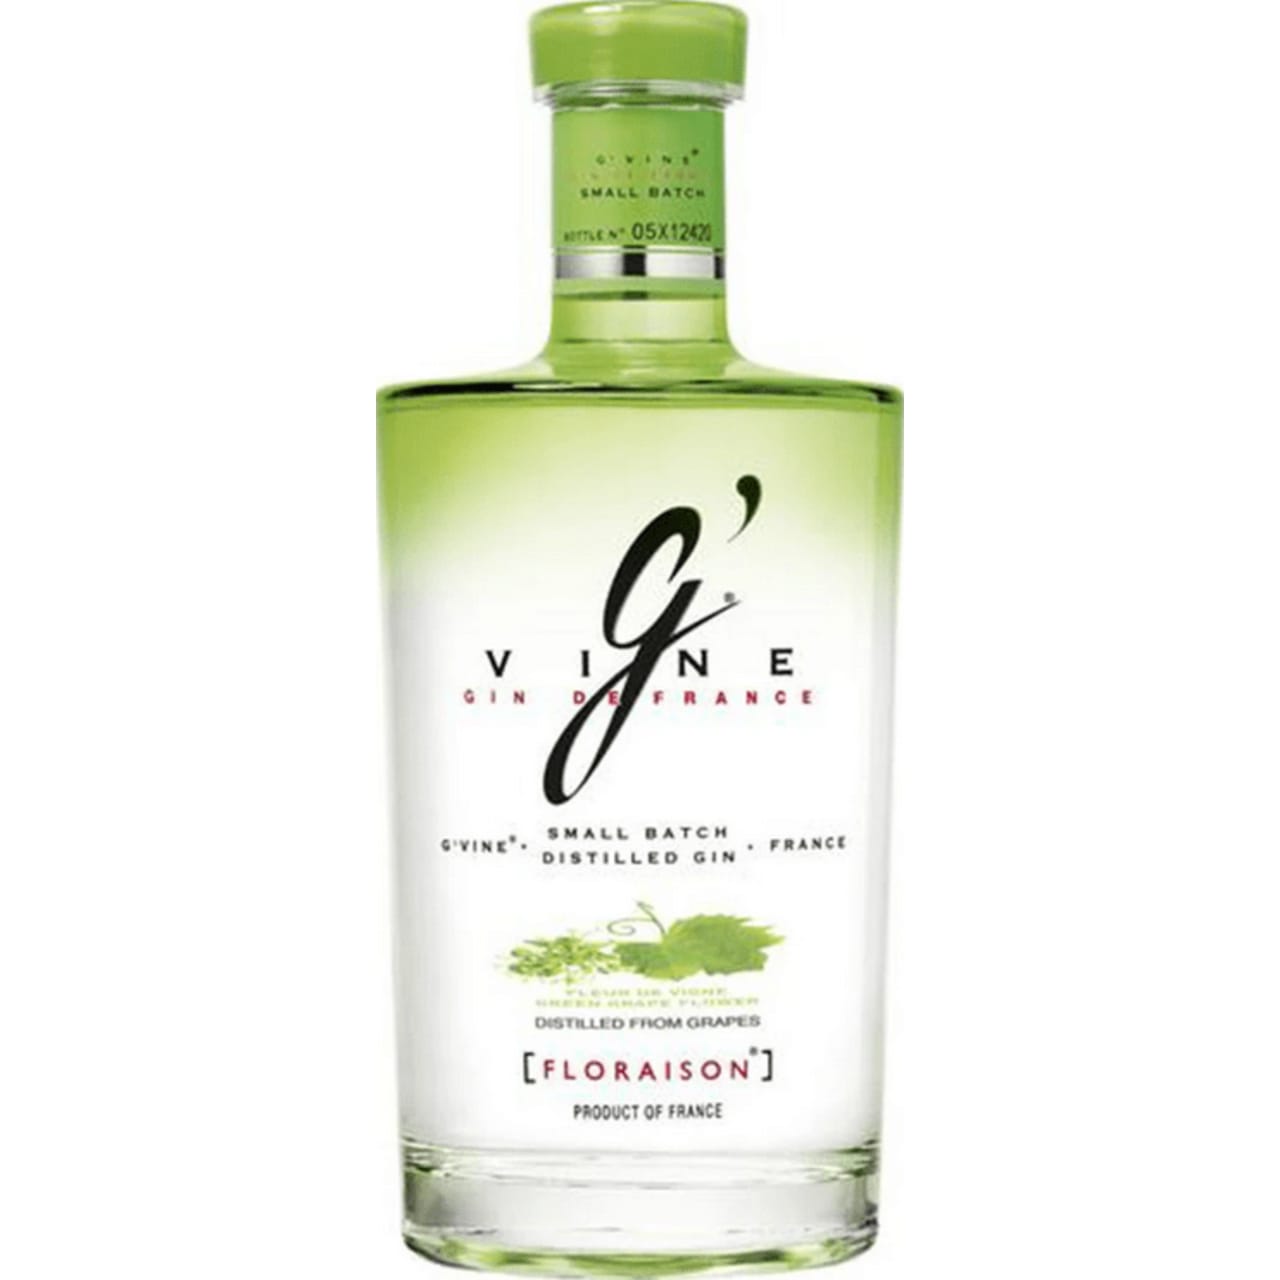 G'Vine Floraison is a French gin made in the Cognac region of France from a grape based spirit rather than grain. The grape neutral spirit is smoother and more heady than its grain cousin and provides a wonderful canvas for the gin botanicals. The subtle, aromatic vine flower together with the grape spirit soften the traditional juniper taste and make it a well balanced and full bodied gin.